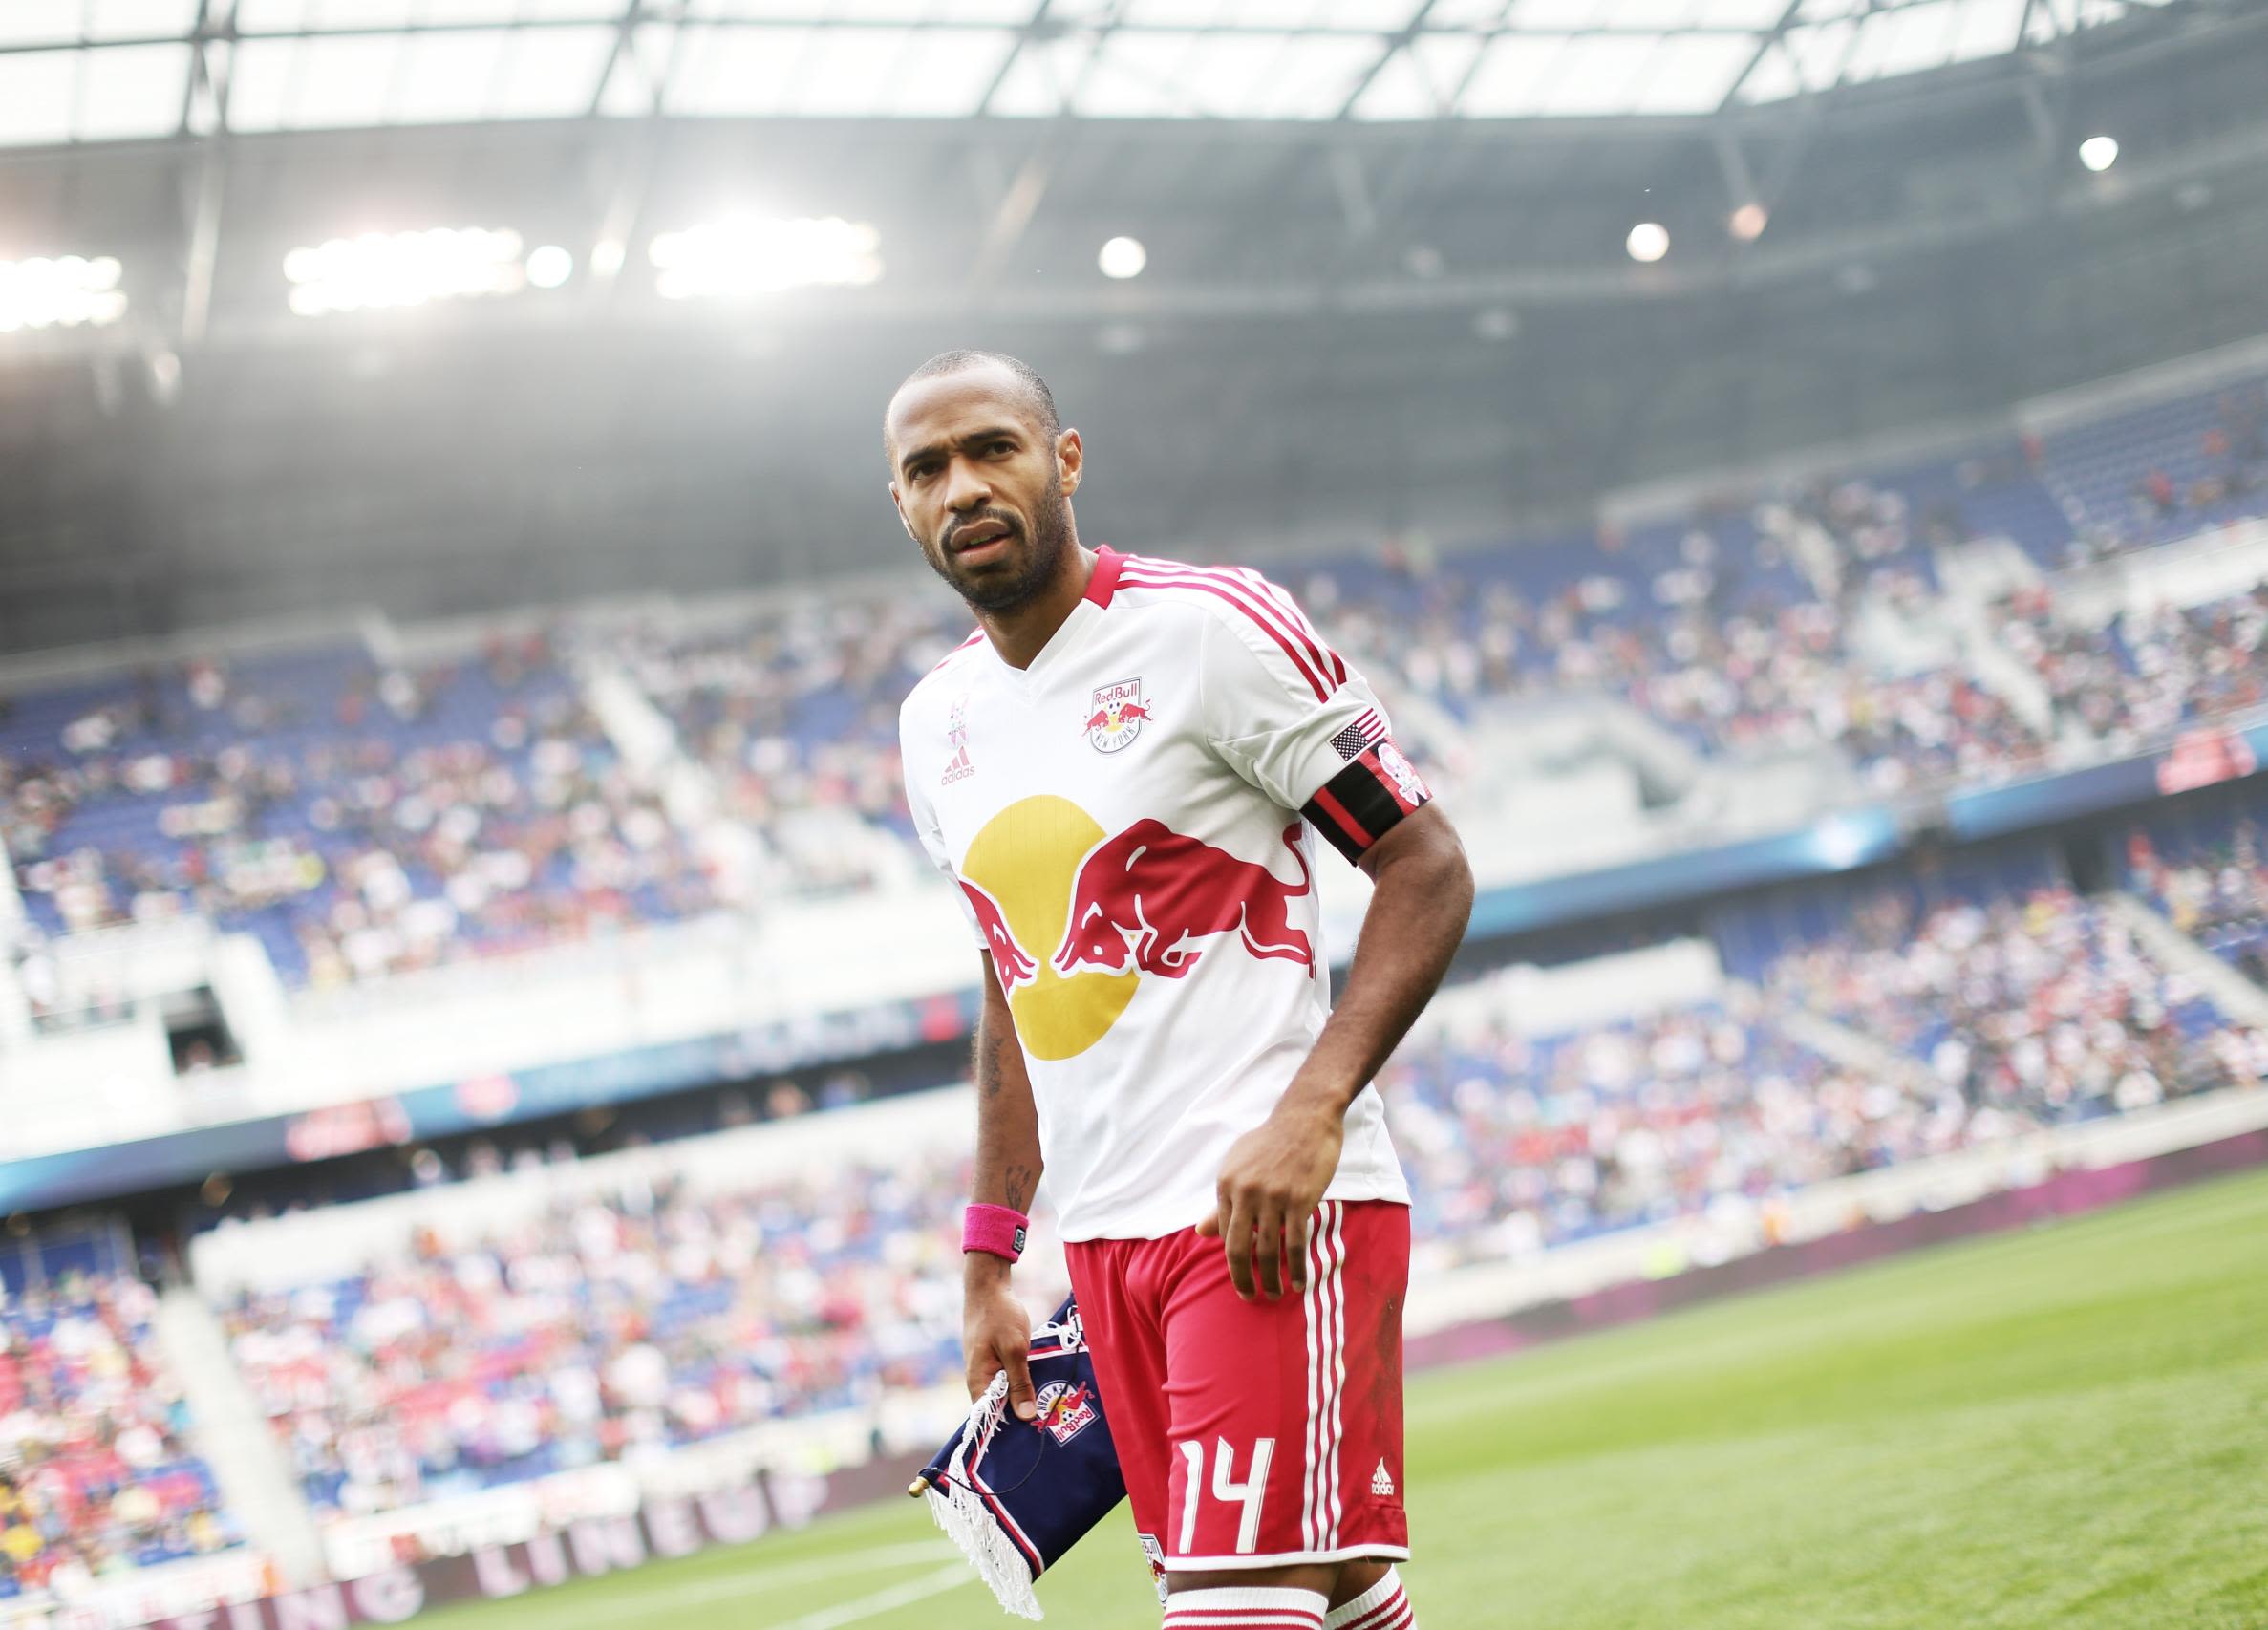 Thierry Henry says he'd have no problem with gay teammates - Once